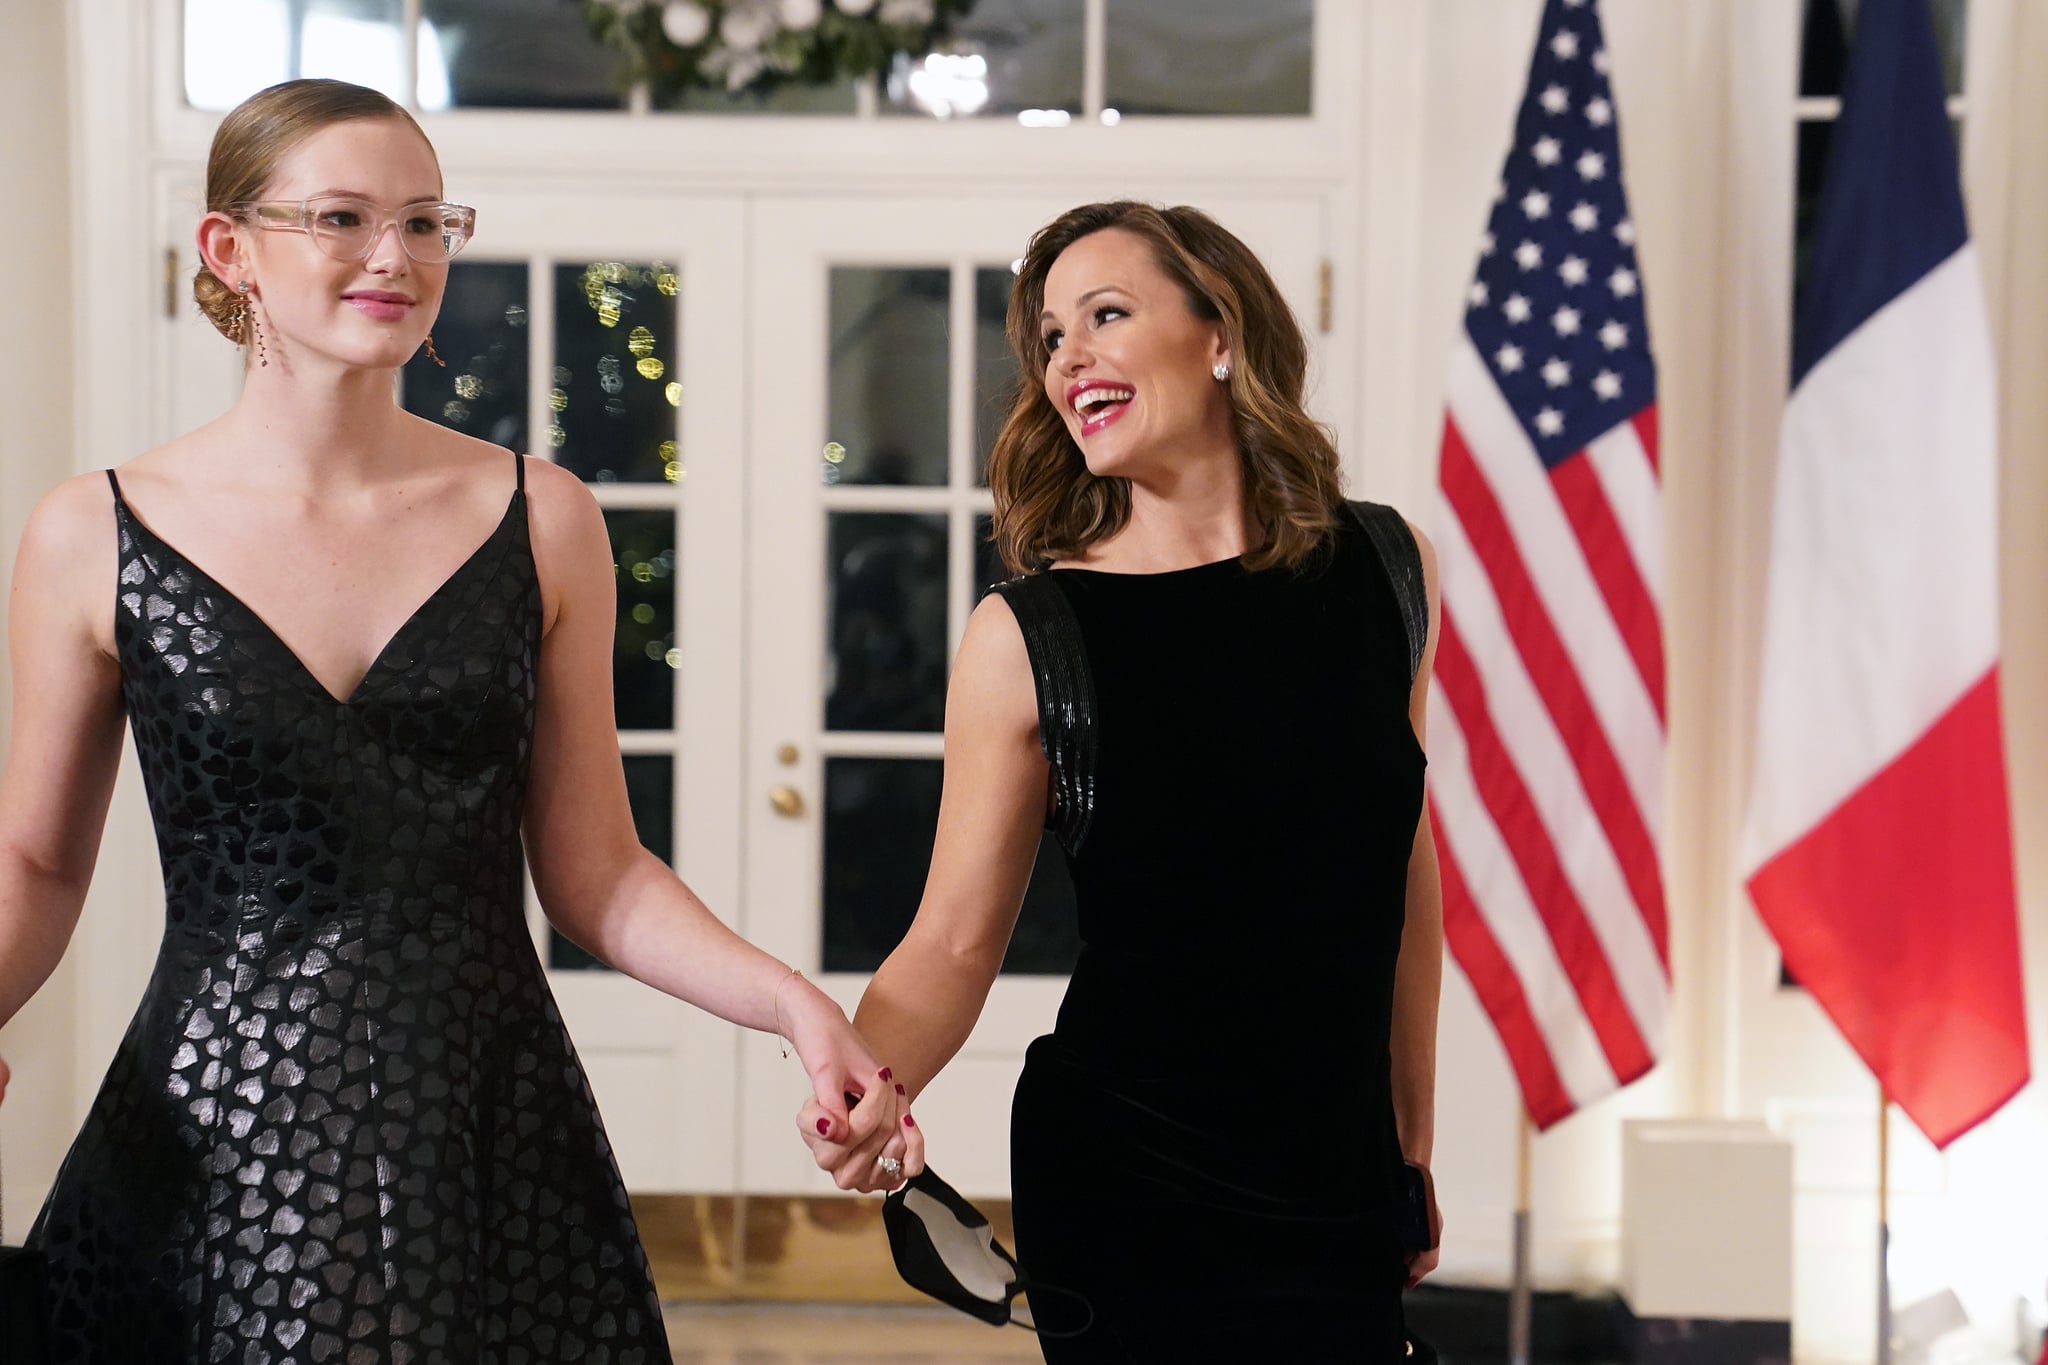 Actress Jennifer Garner and her daughter Violet arrive for the White House state dinner for French President Emmanuel Macron at the White House on December 1, 2022 in Washington, DC. The official state visit is the first for the Biden administration. (Photo by Nathan Howard/Getty Images)